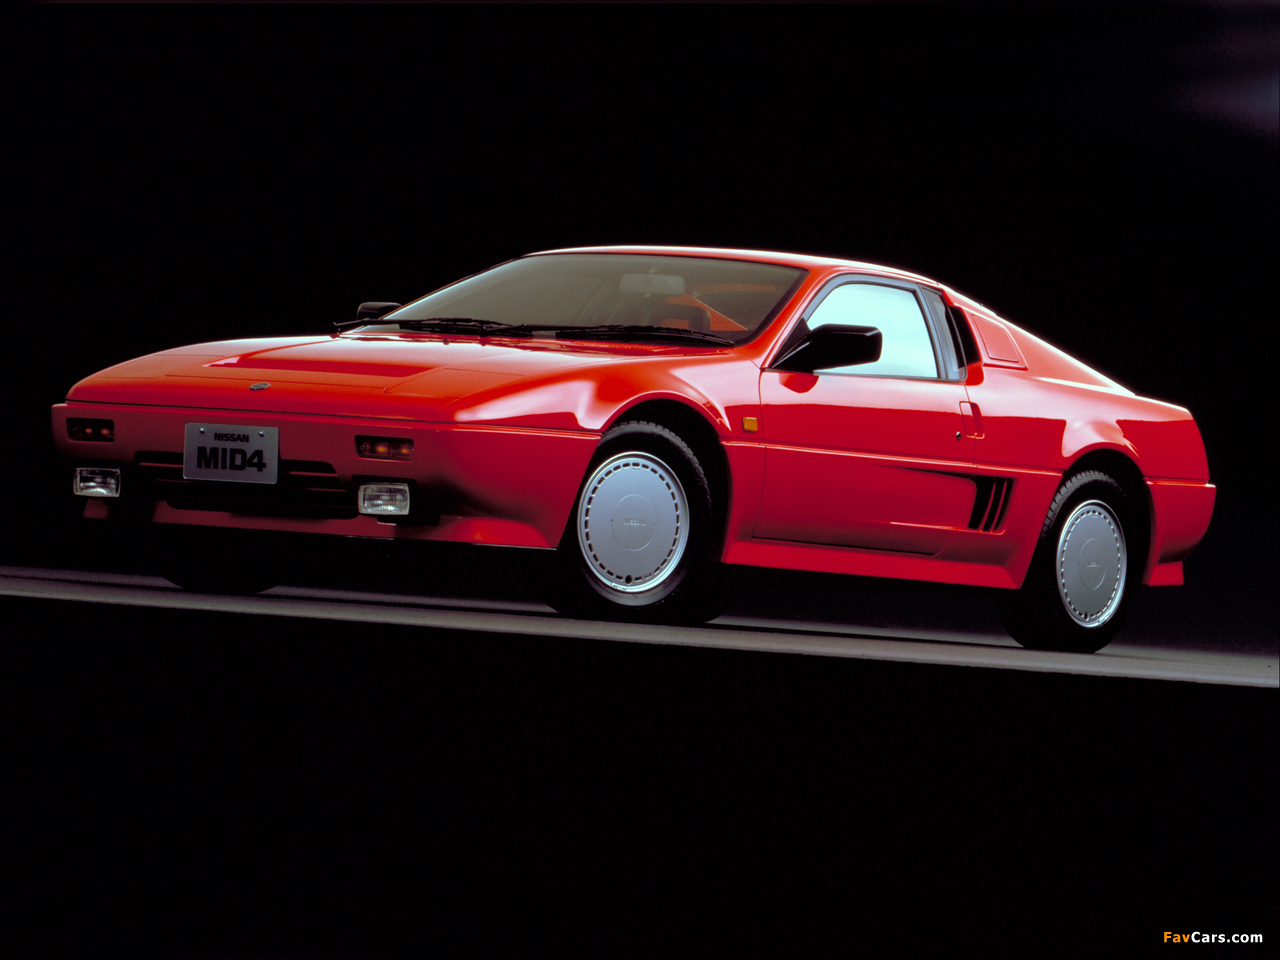 Images of Nissan Mid4 Concept 1985 (1280 x 960)